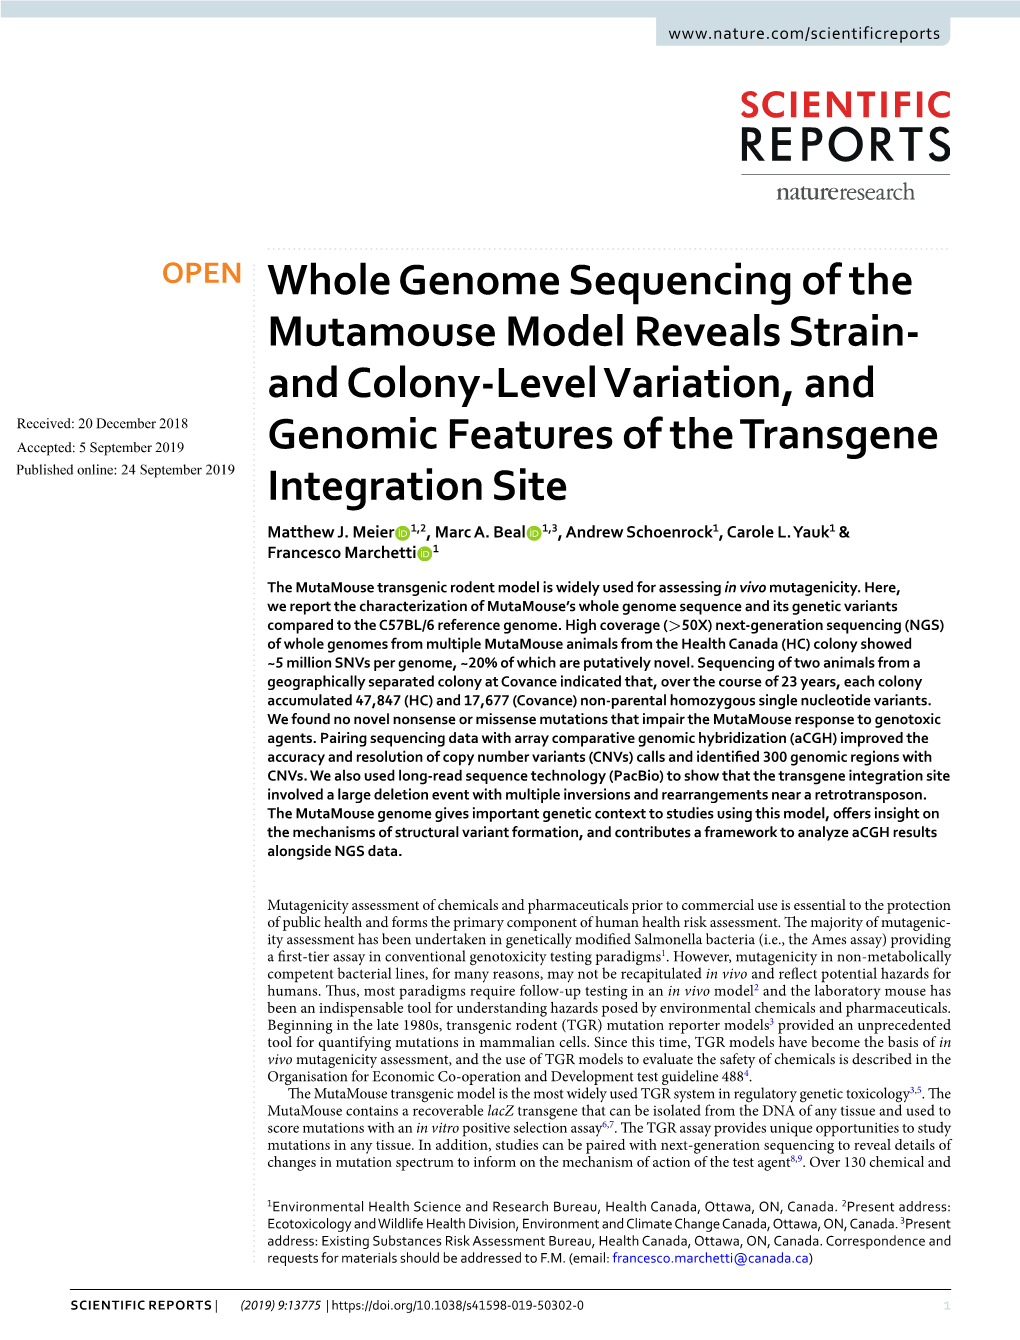 Whole Genome Sequencing of the Mutamouse Model Reveals Strain